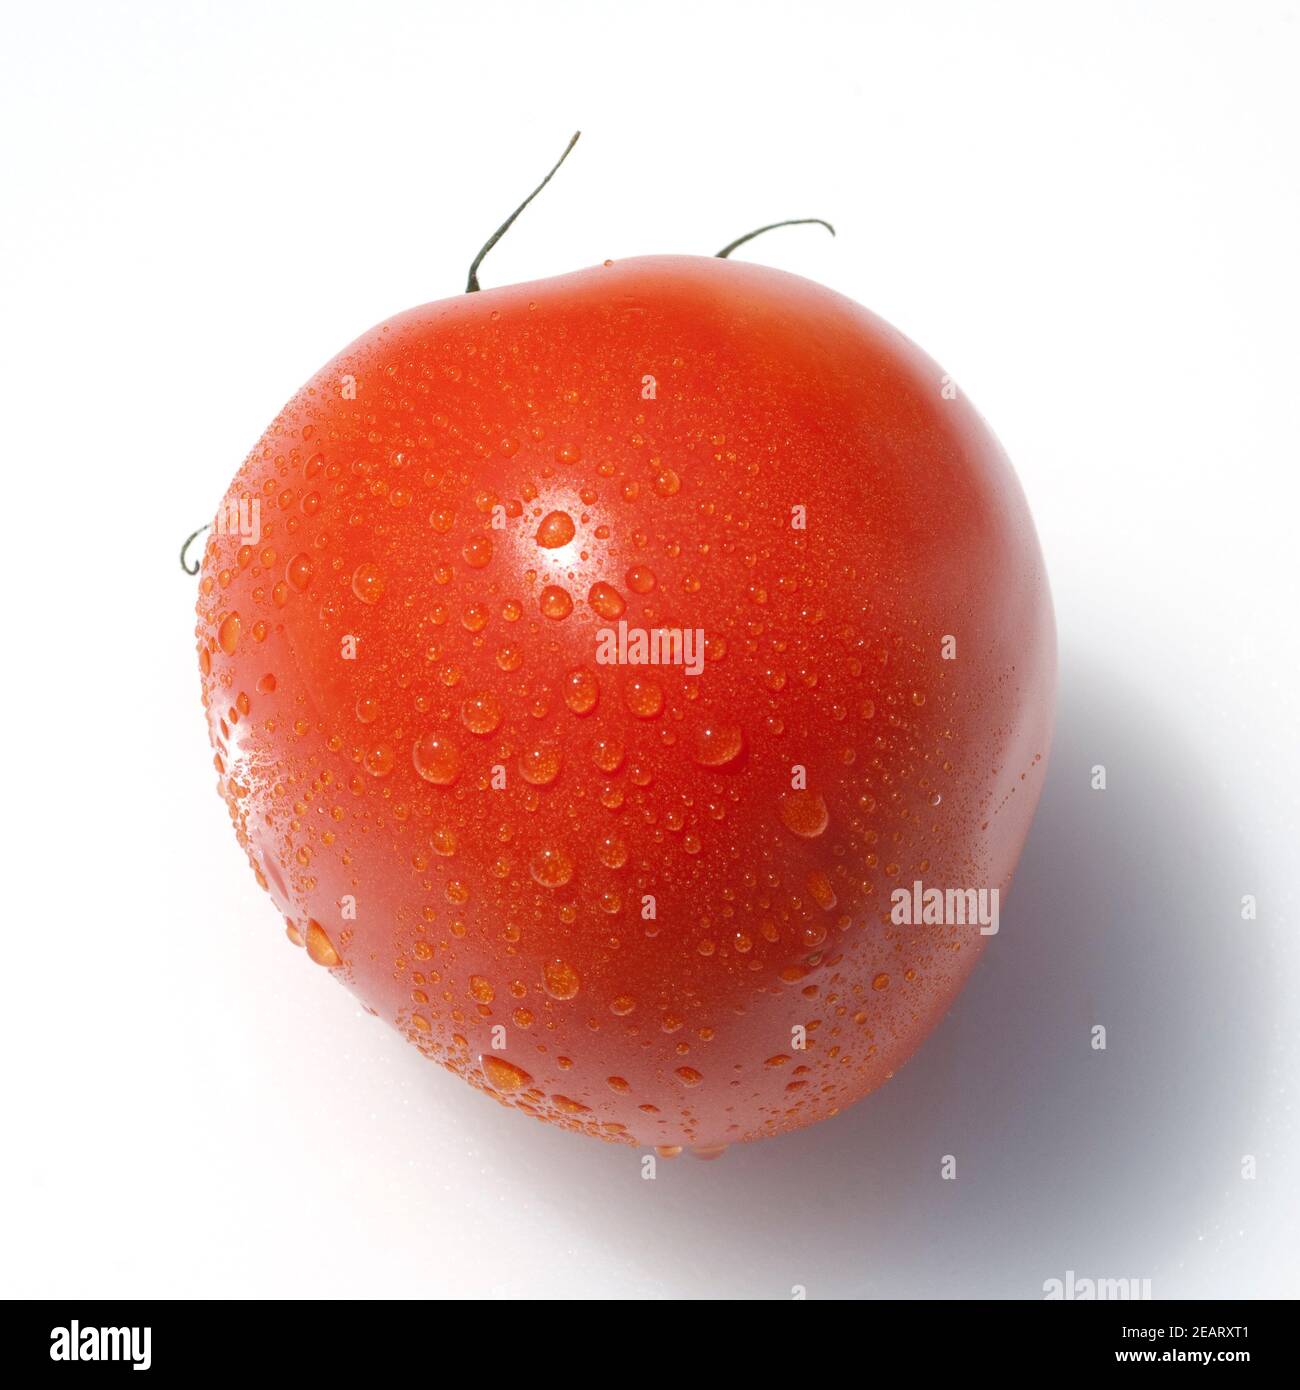 Roma tomatoes variety hi-res images 3 - Page and photography stock - Alamy